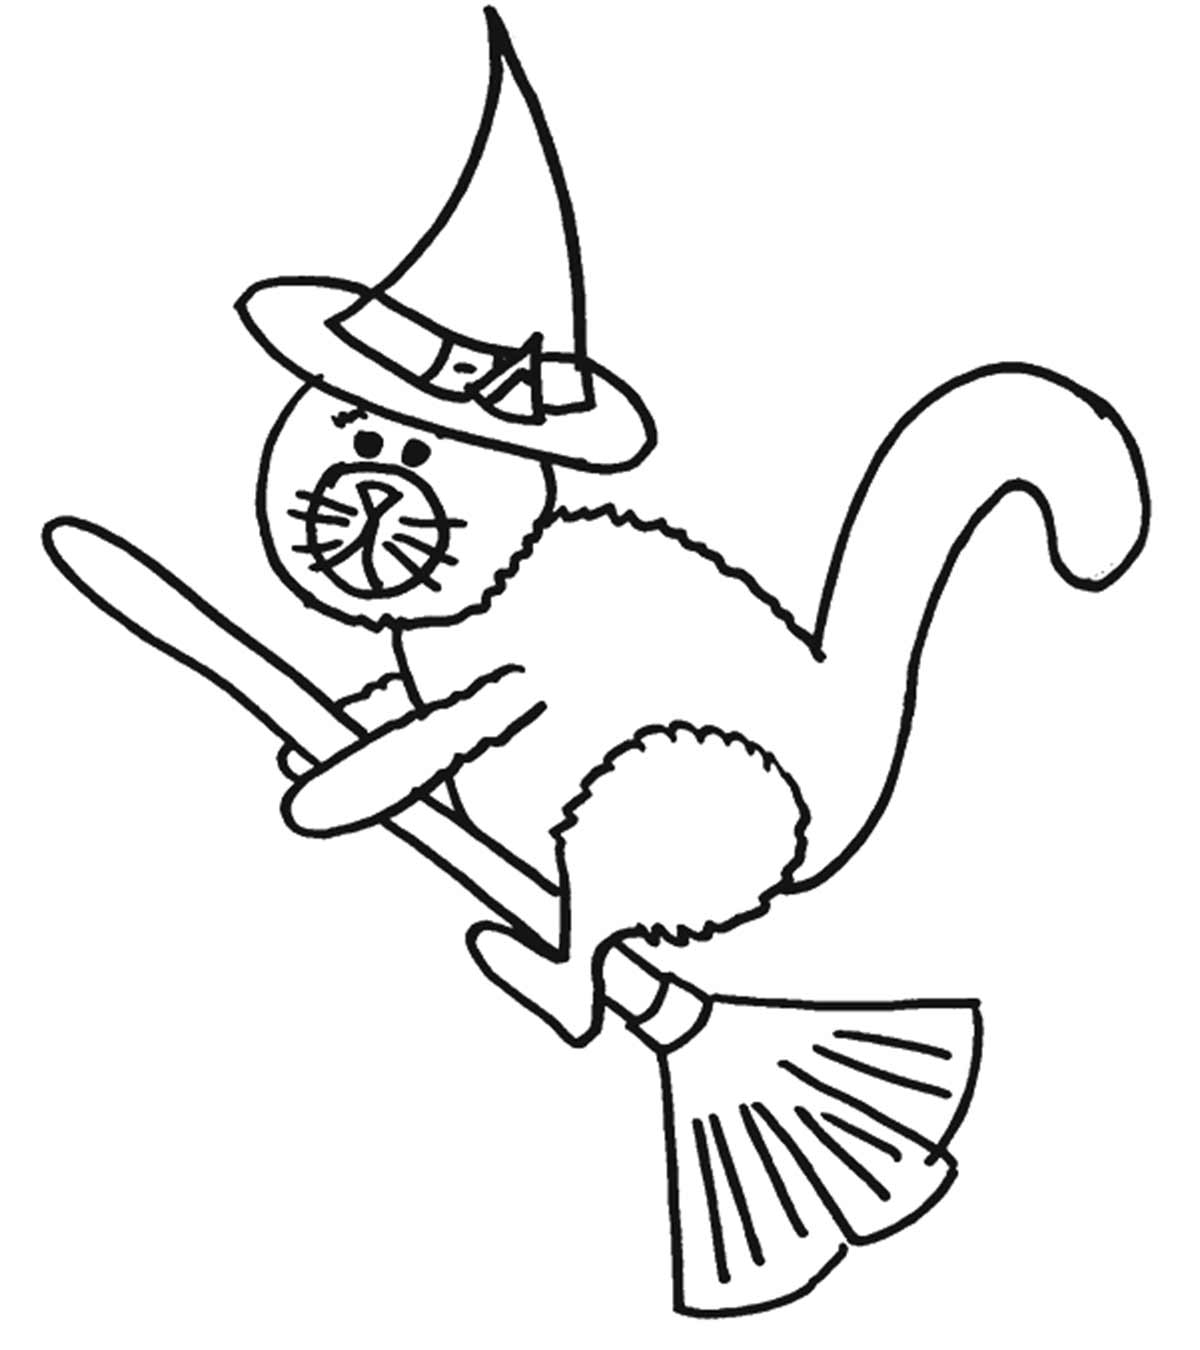 Top 25 Halloween Coloring Pages For Your Little Ones_image